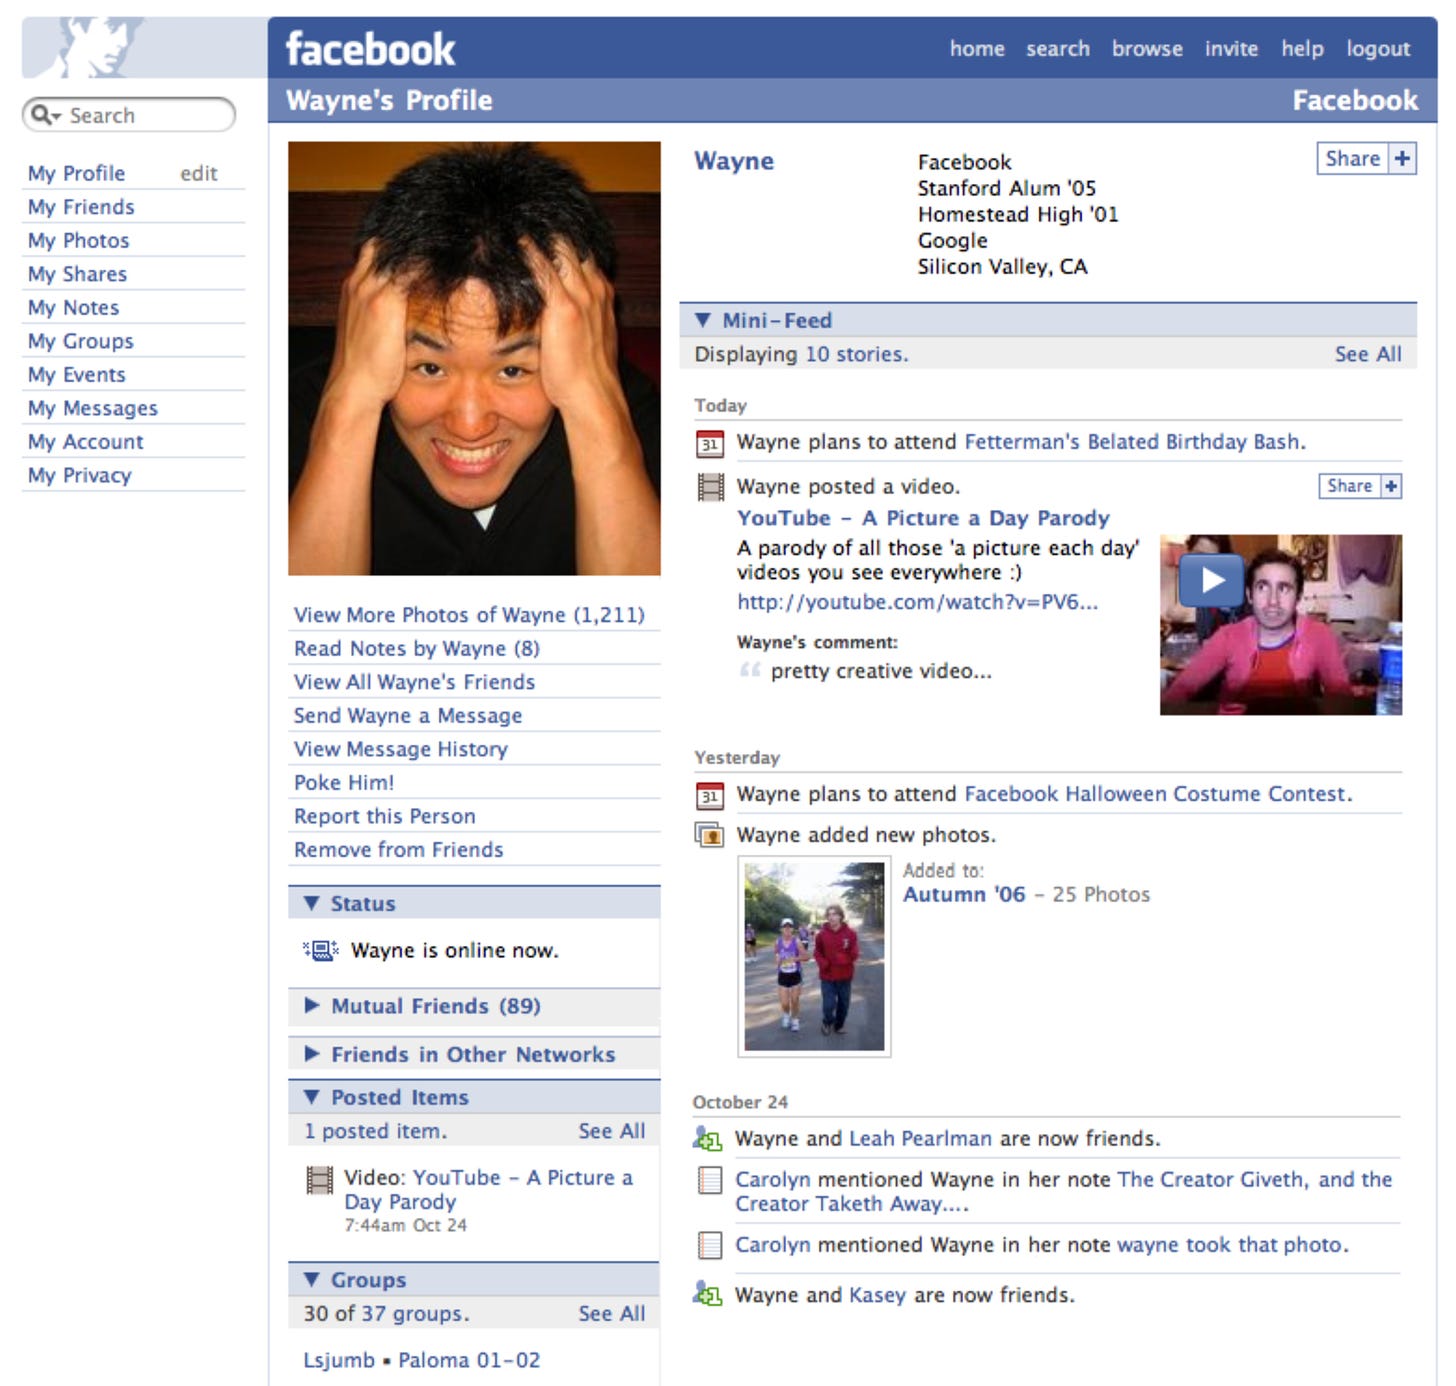 Facebook&#39;s 11th Year: Every Profile Page Update in the Last Decade | Time